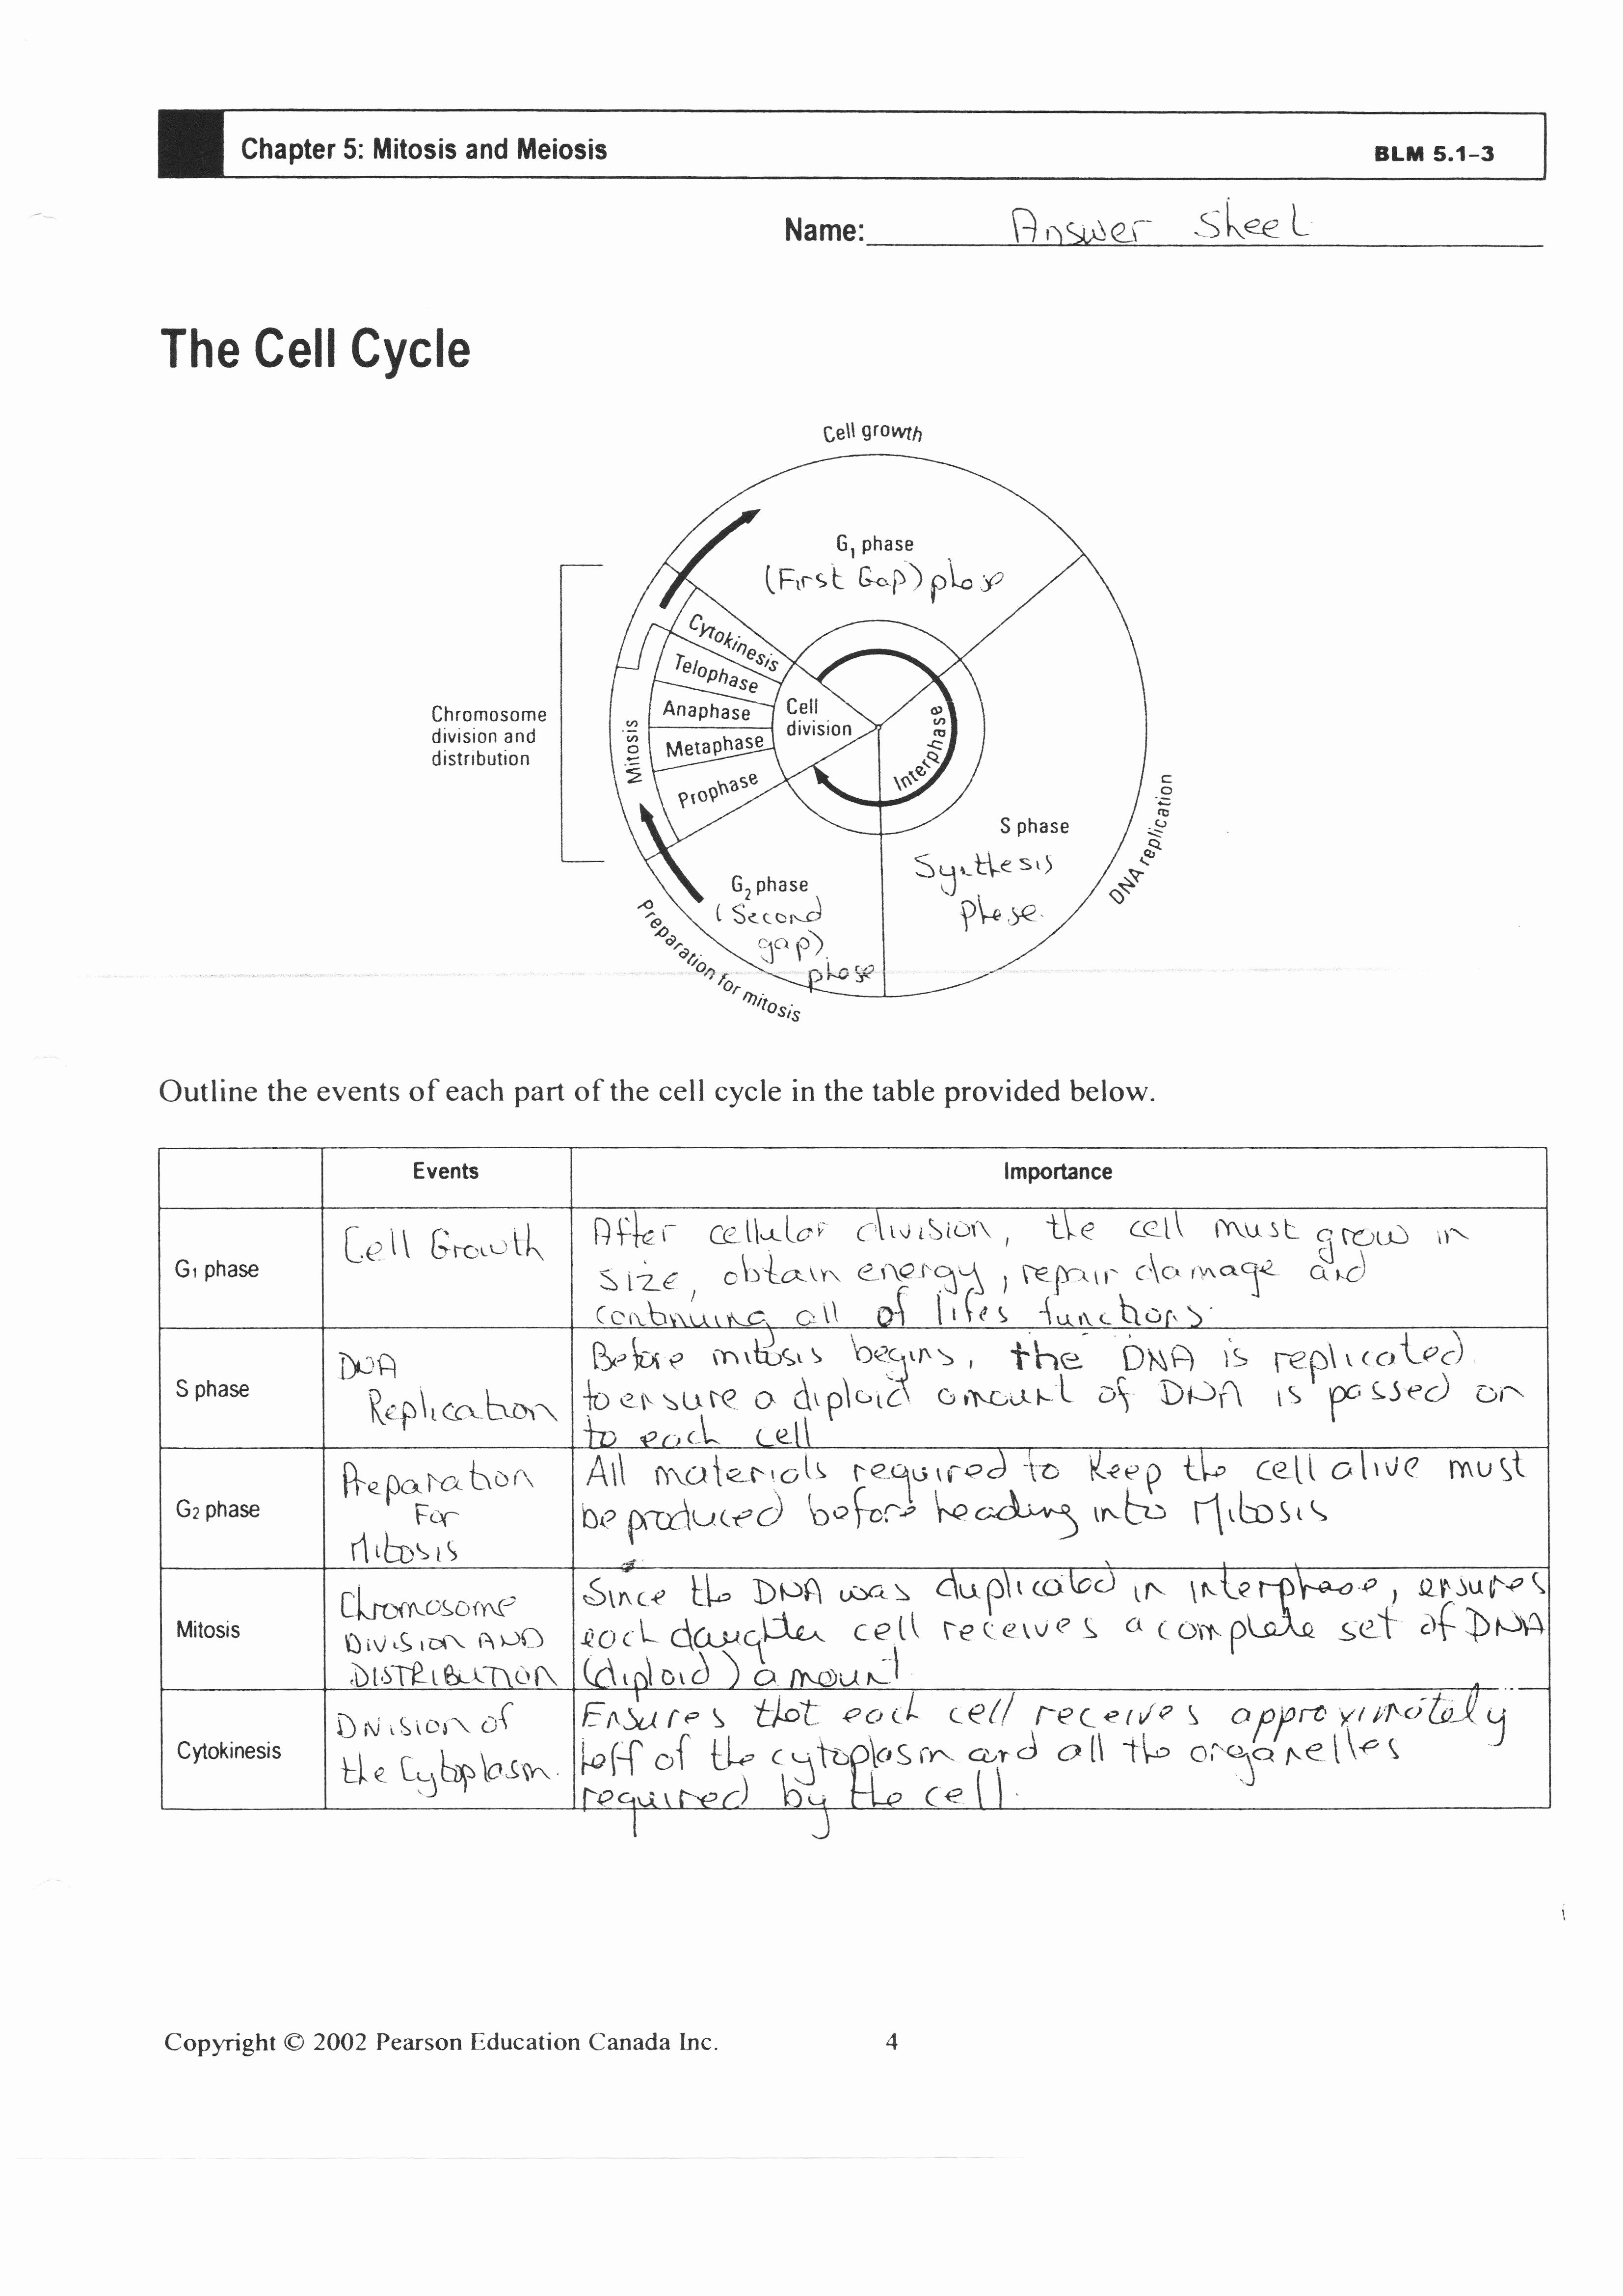 Onion Cell Mitosis Worksheet Answers New Ion Cell Mitosis Worksheet Answers Id 0 Worksheet